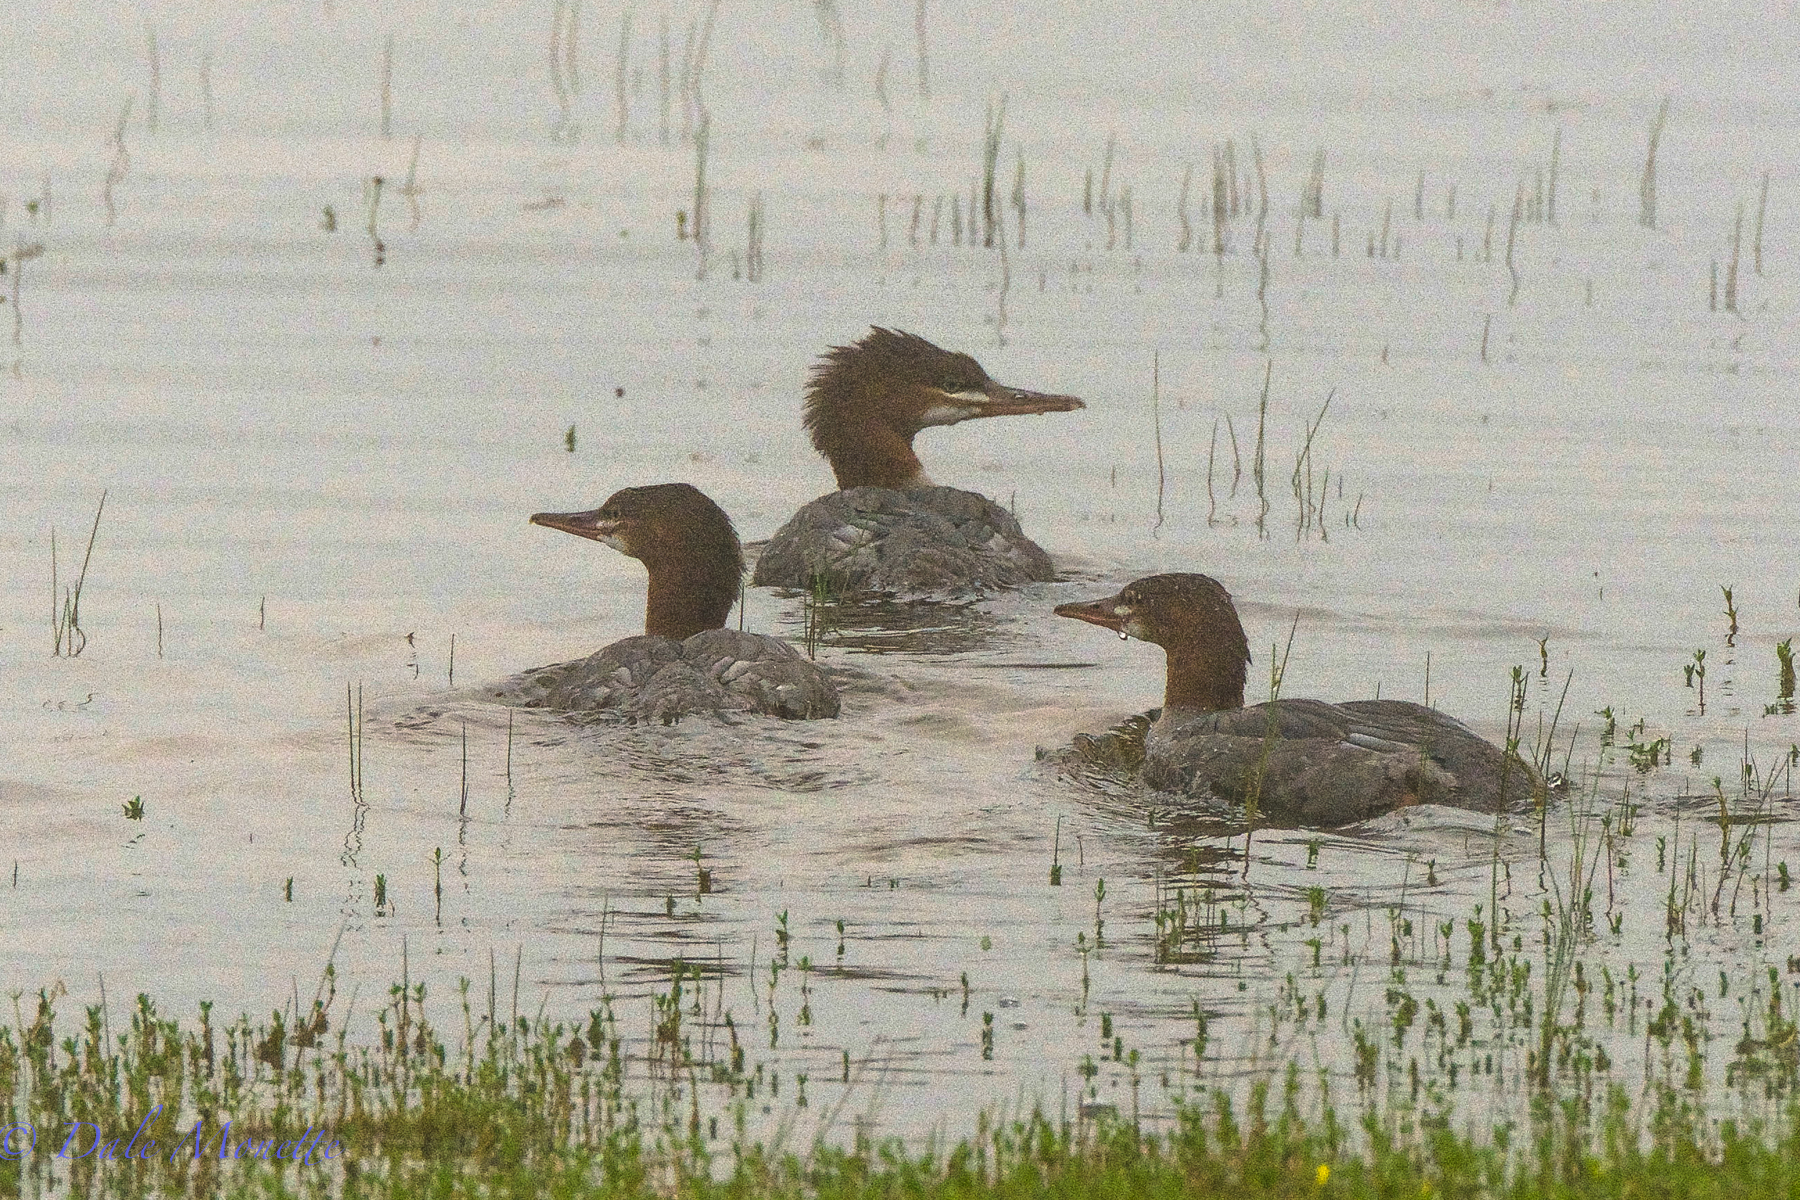 Common merganser chicks cruising the shore for bug, fish and anything thats good to eat. Early morning fog.  8/17/15